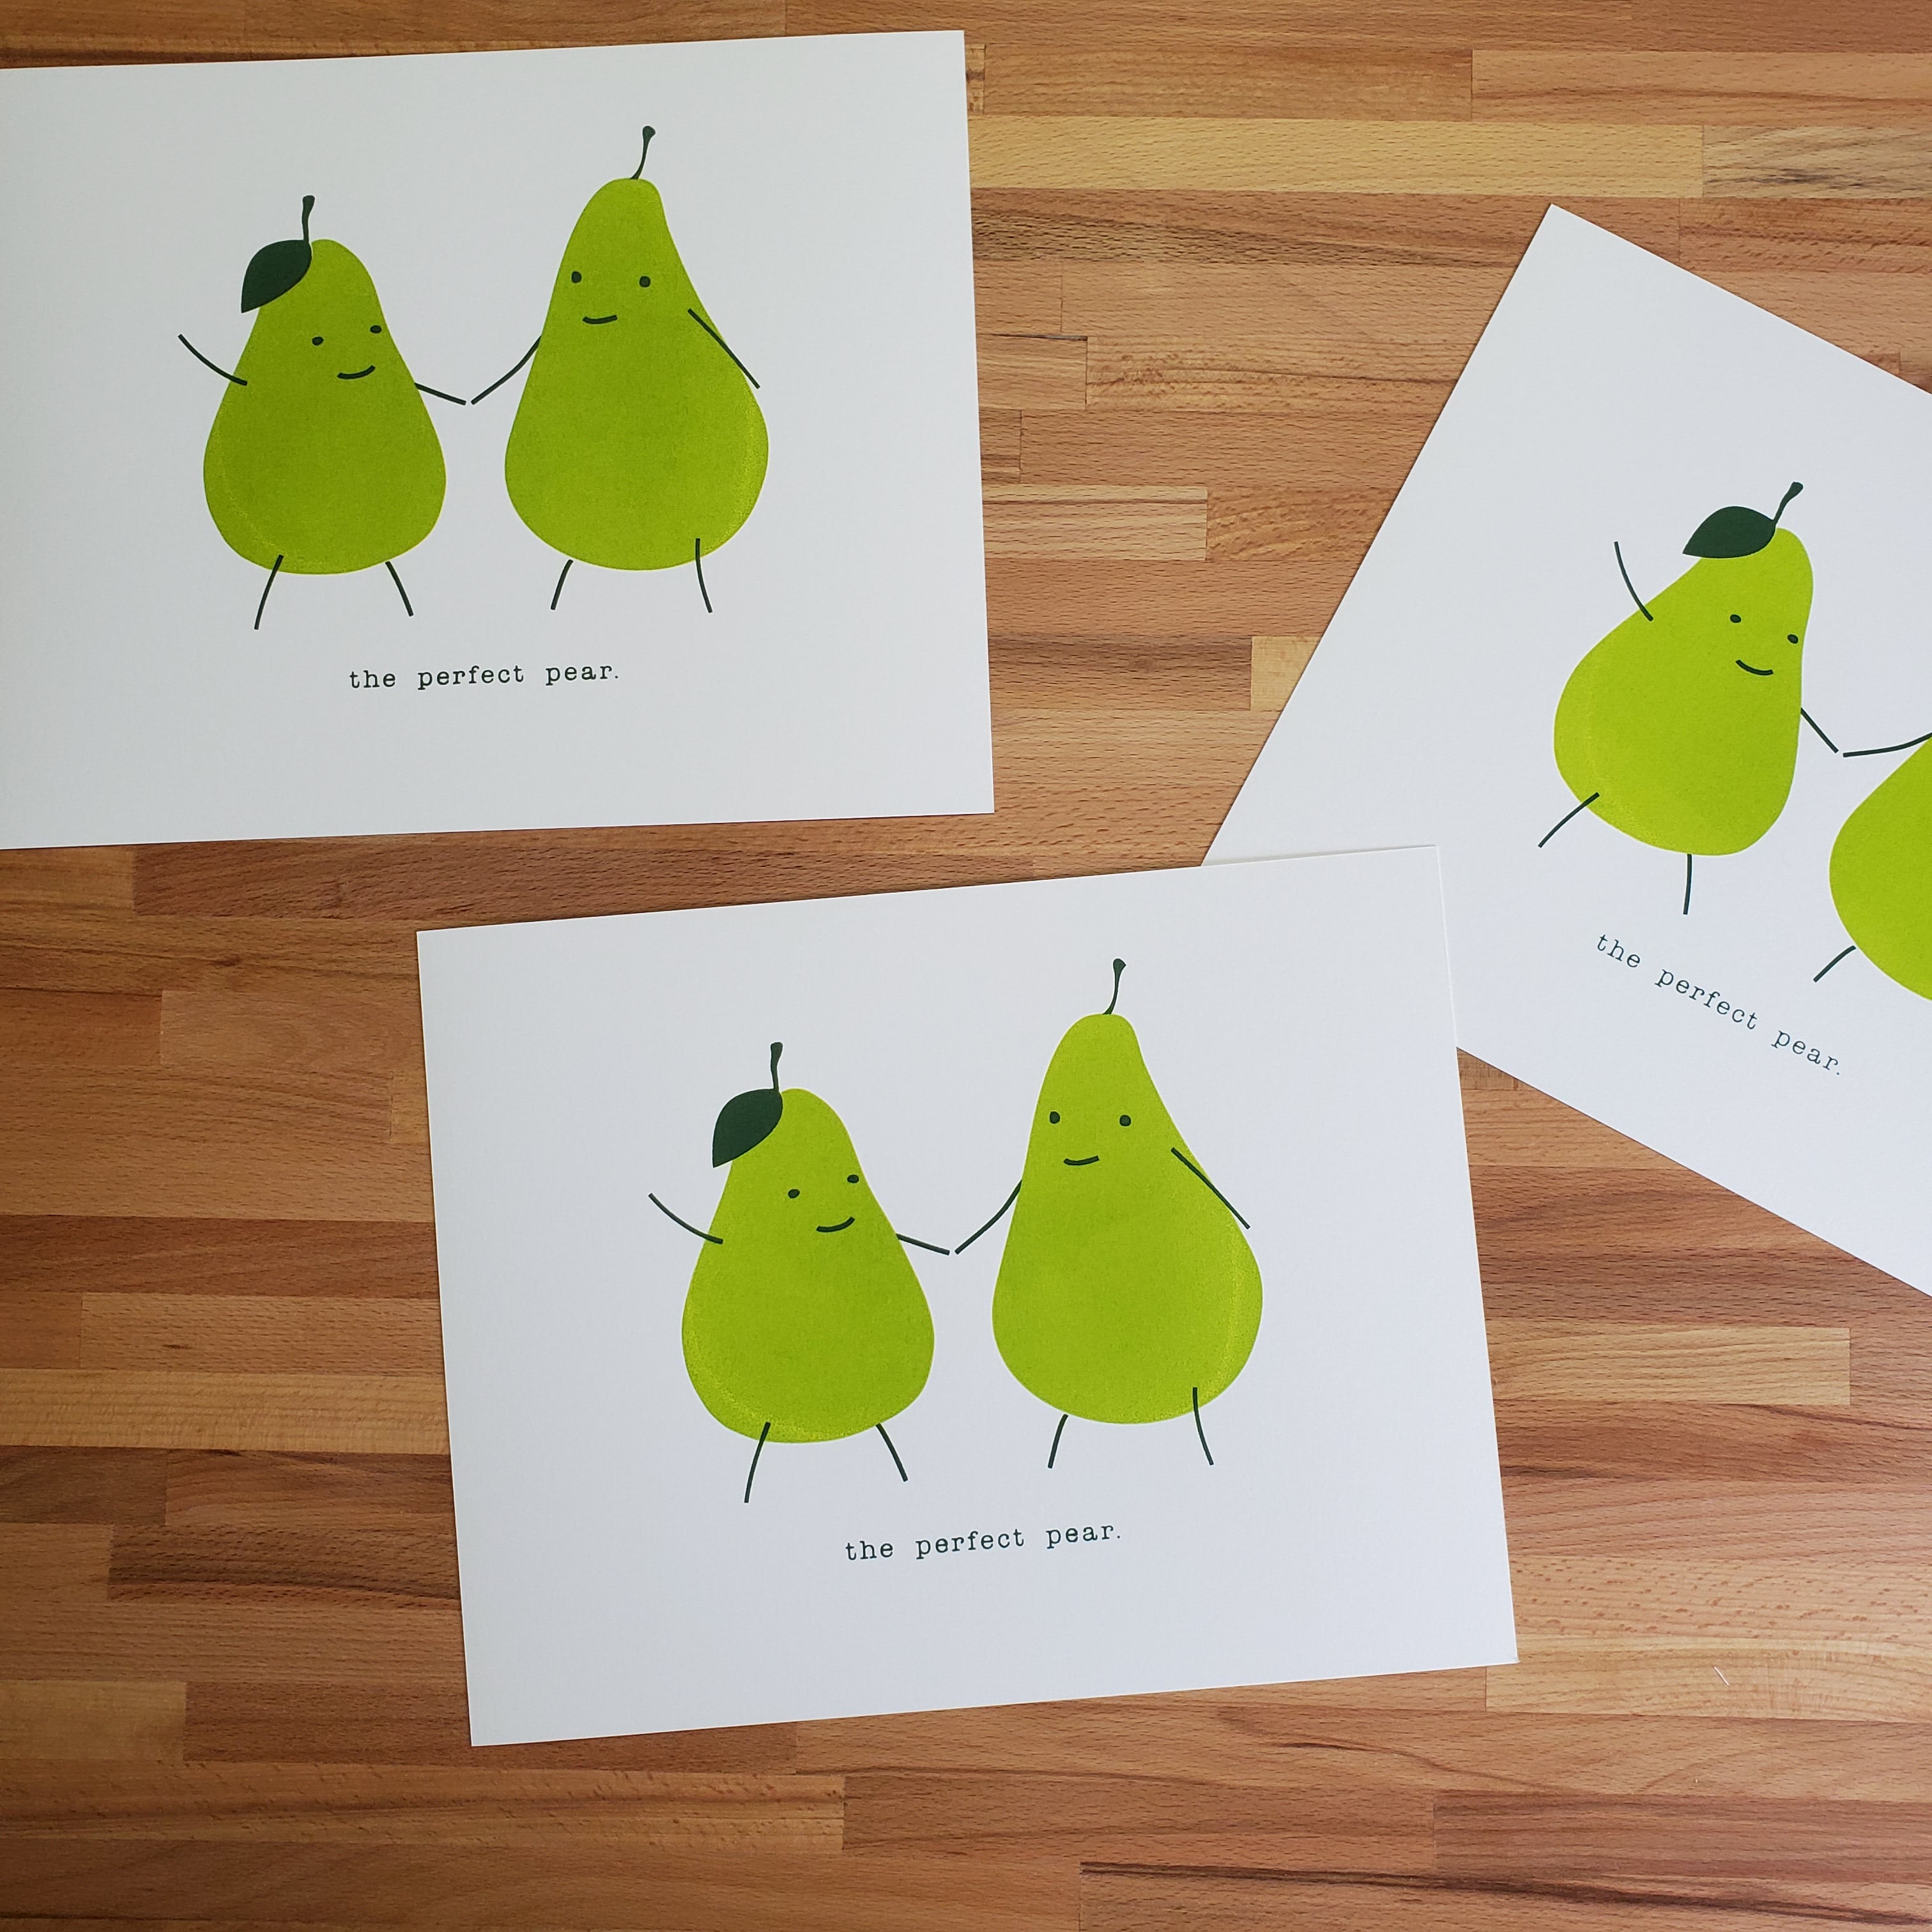 Perfect Pear 14 x 11 Silk Screen Print - Hand Printed Poster - Unframed